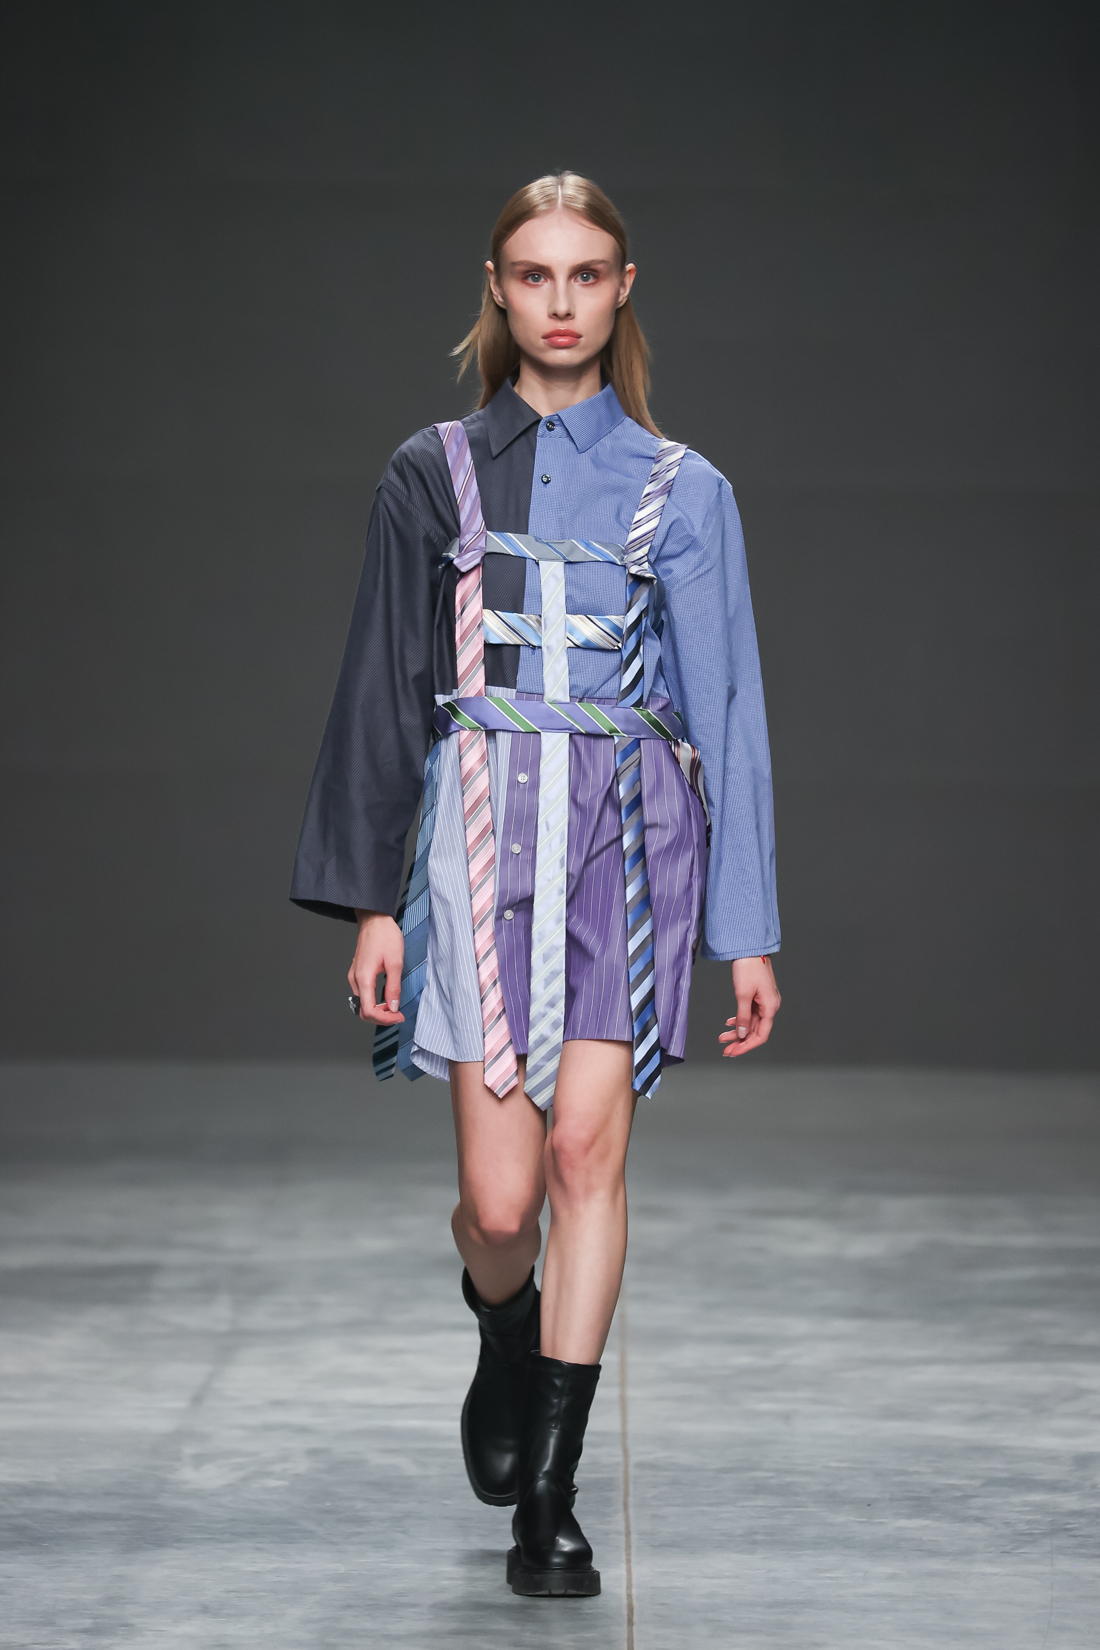 VINA, a Sustainable designer showing their SS22 collection at Mercedes-Benz Fashion Week Russia.